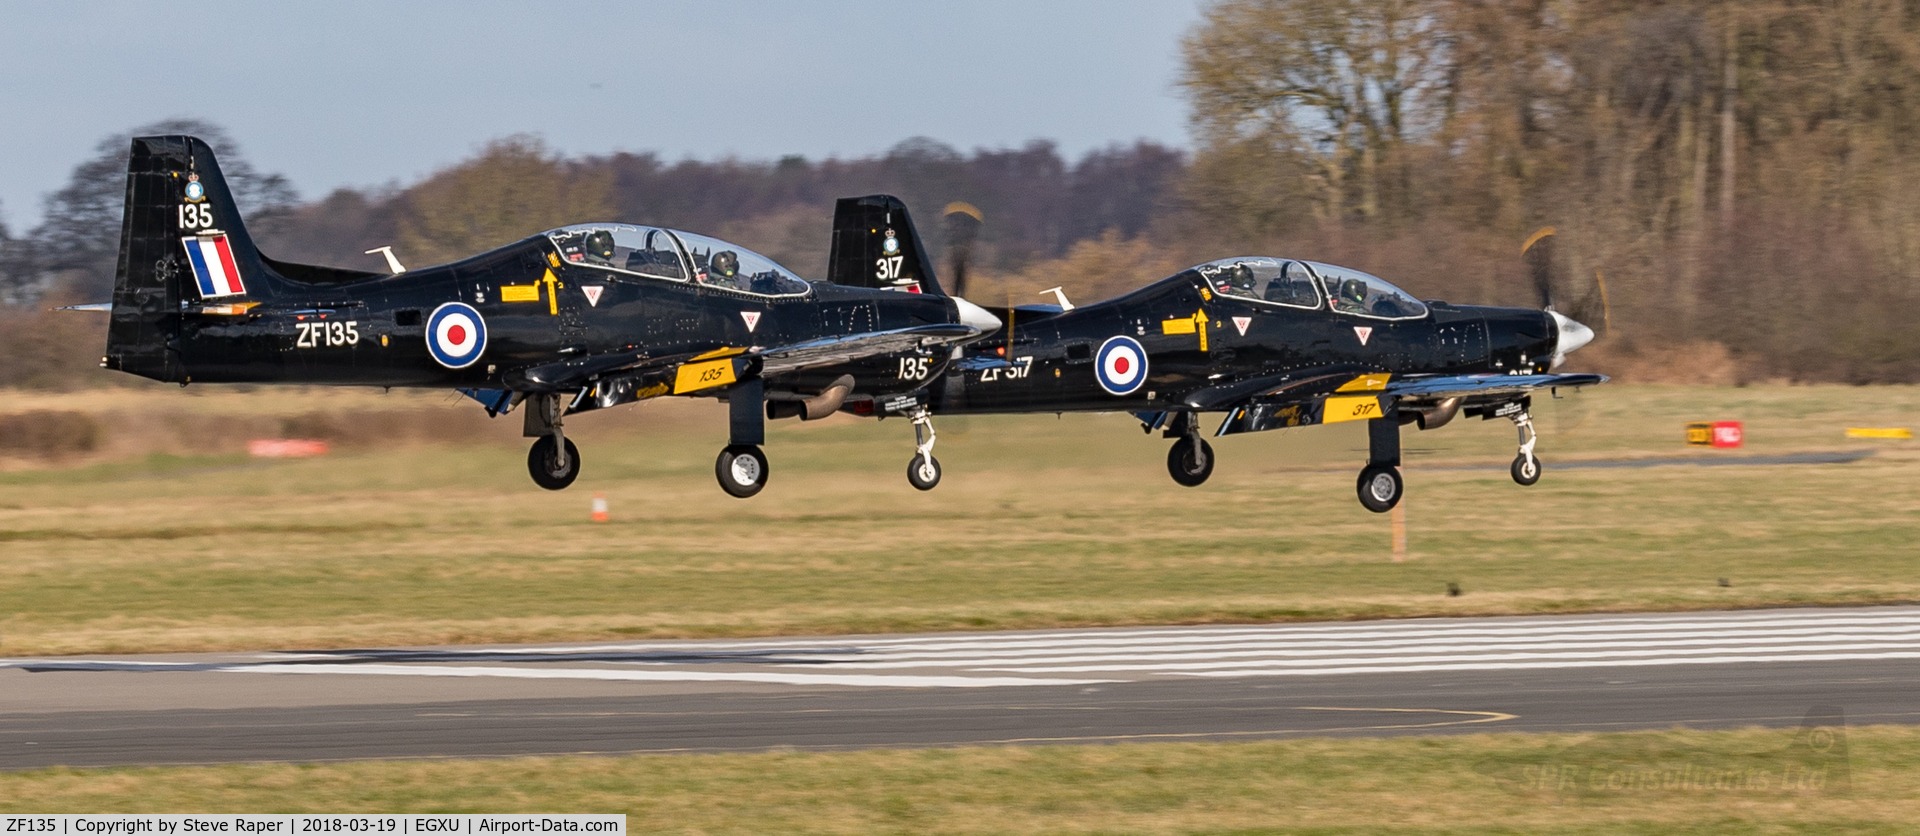 ZF135, 1986 Short S-312 Tucano T1 C/N S001/T1, Pairs landing with ZF317, Linton rwy 03.